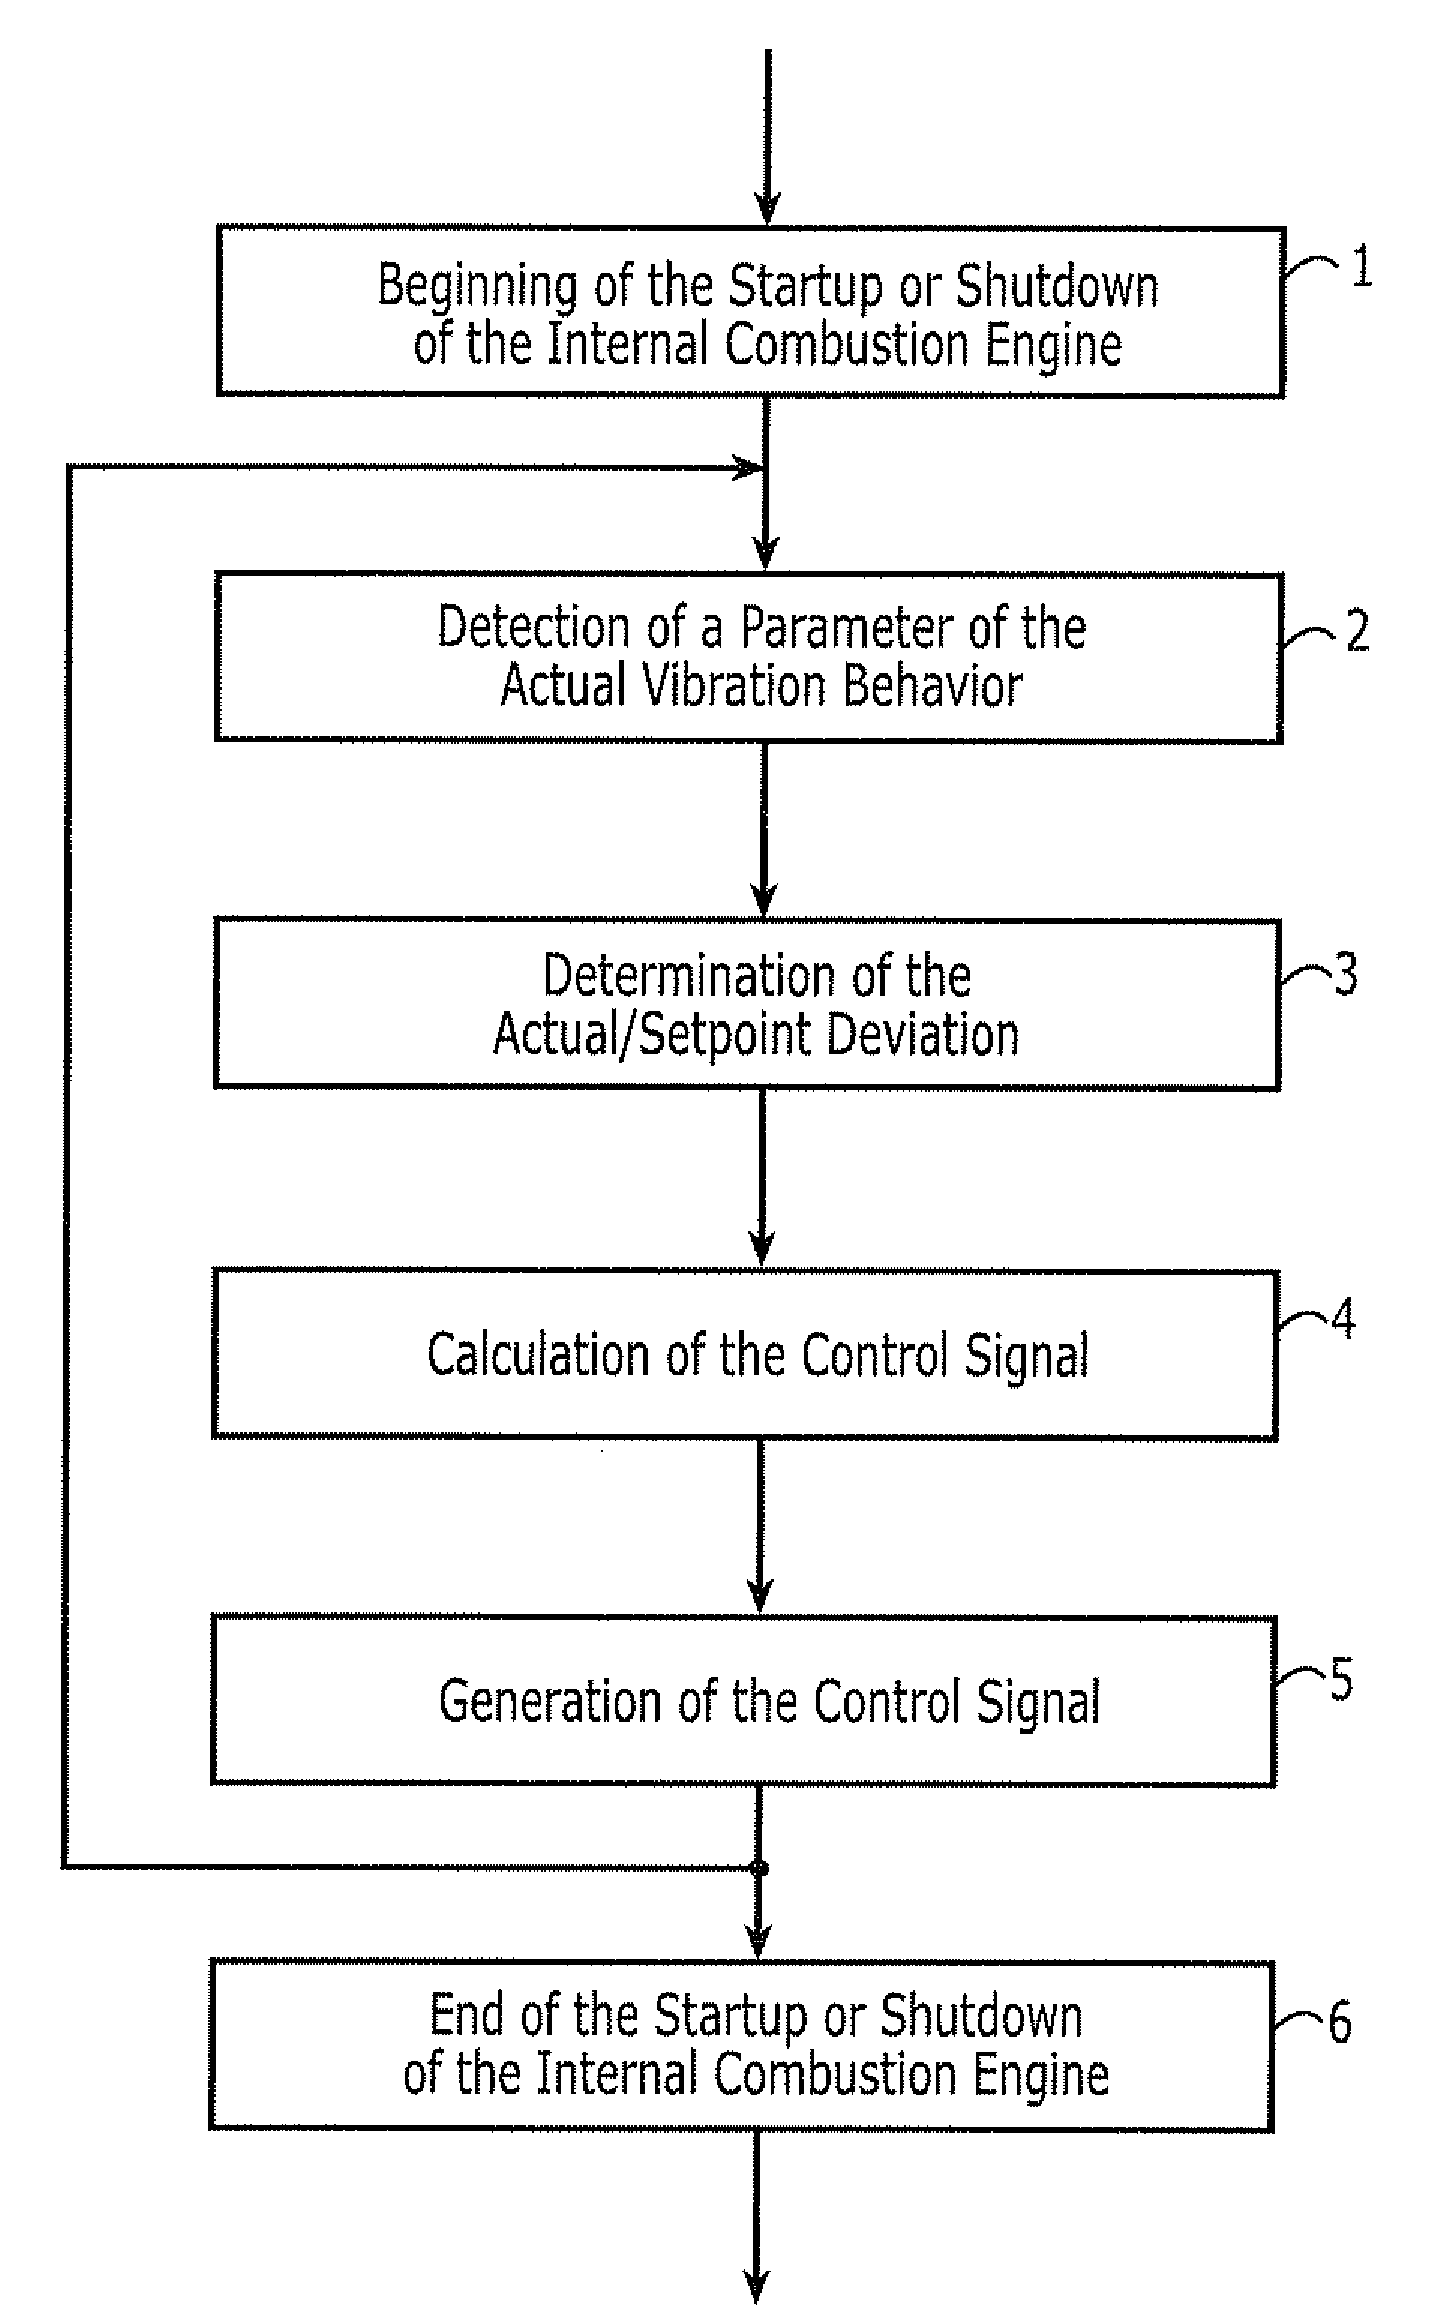 Method and device for reducing vibrations during the shutdown or startup of engines, in particular internal combustion engines